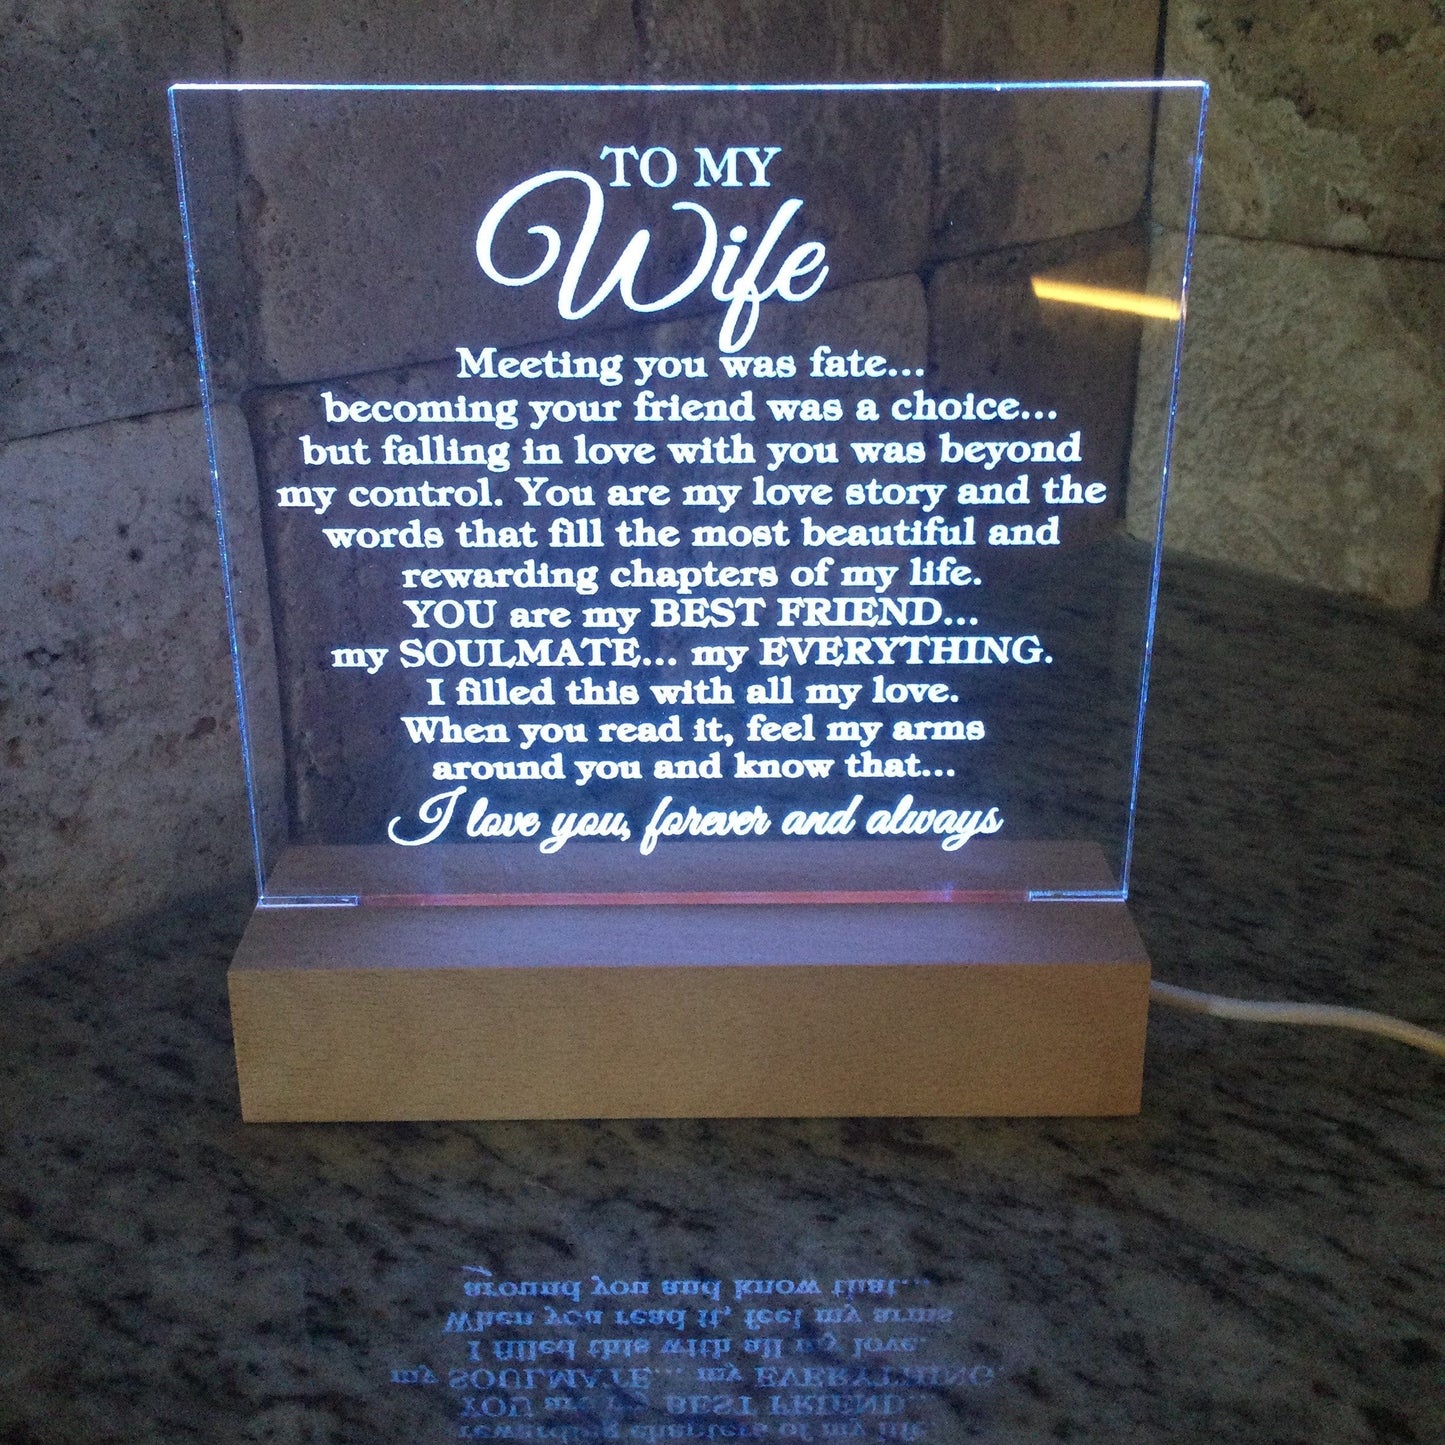 To My Wife "Meeting you was..." Acrylic Plaque With Lighted Wooden Base